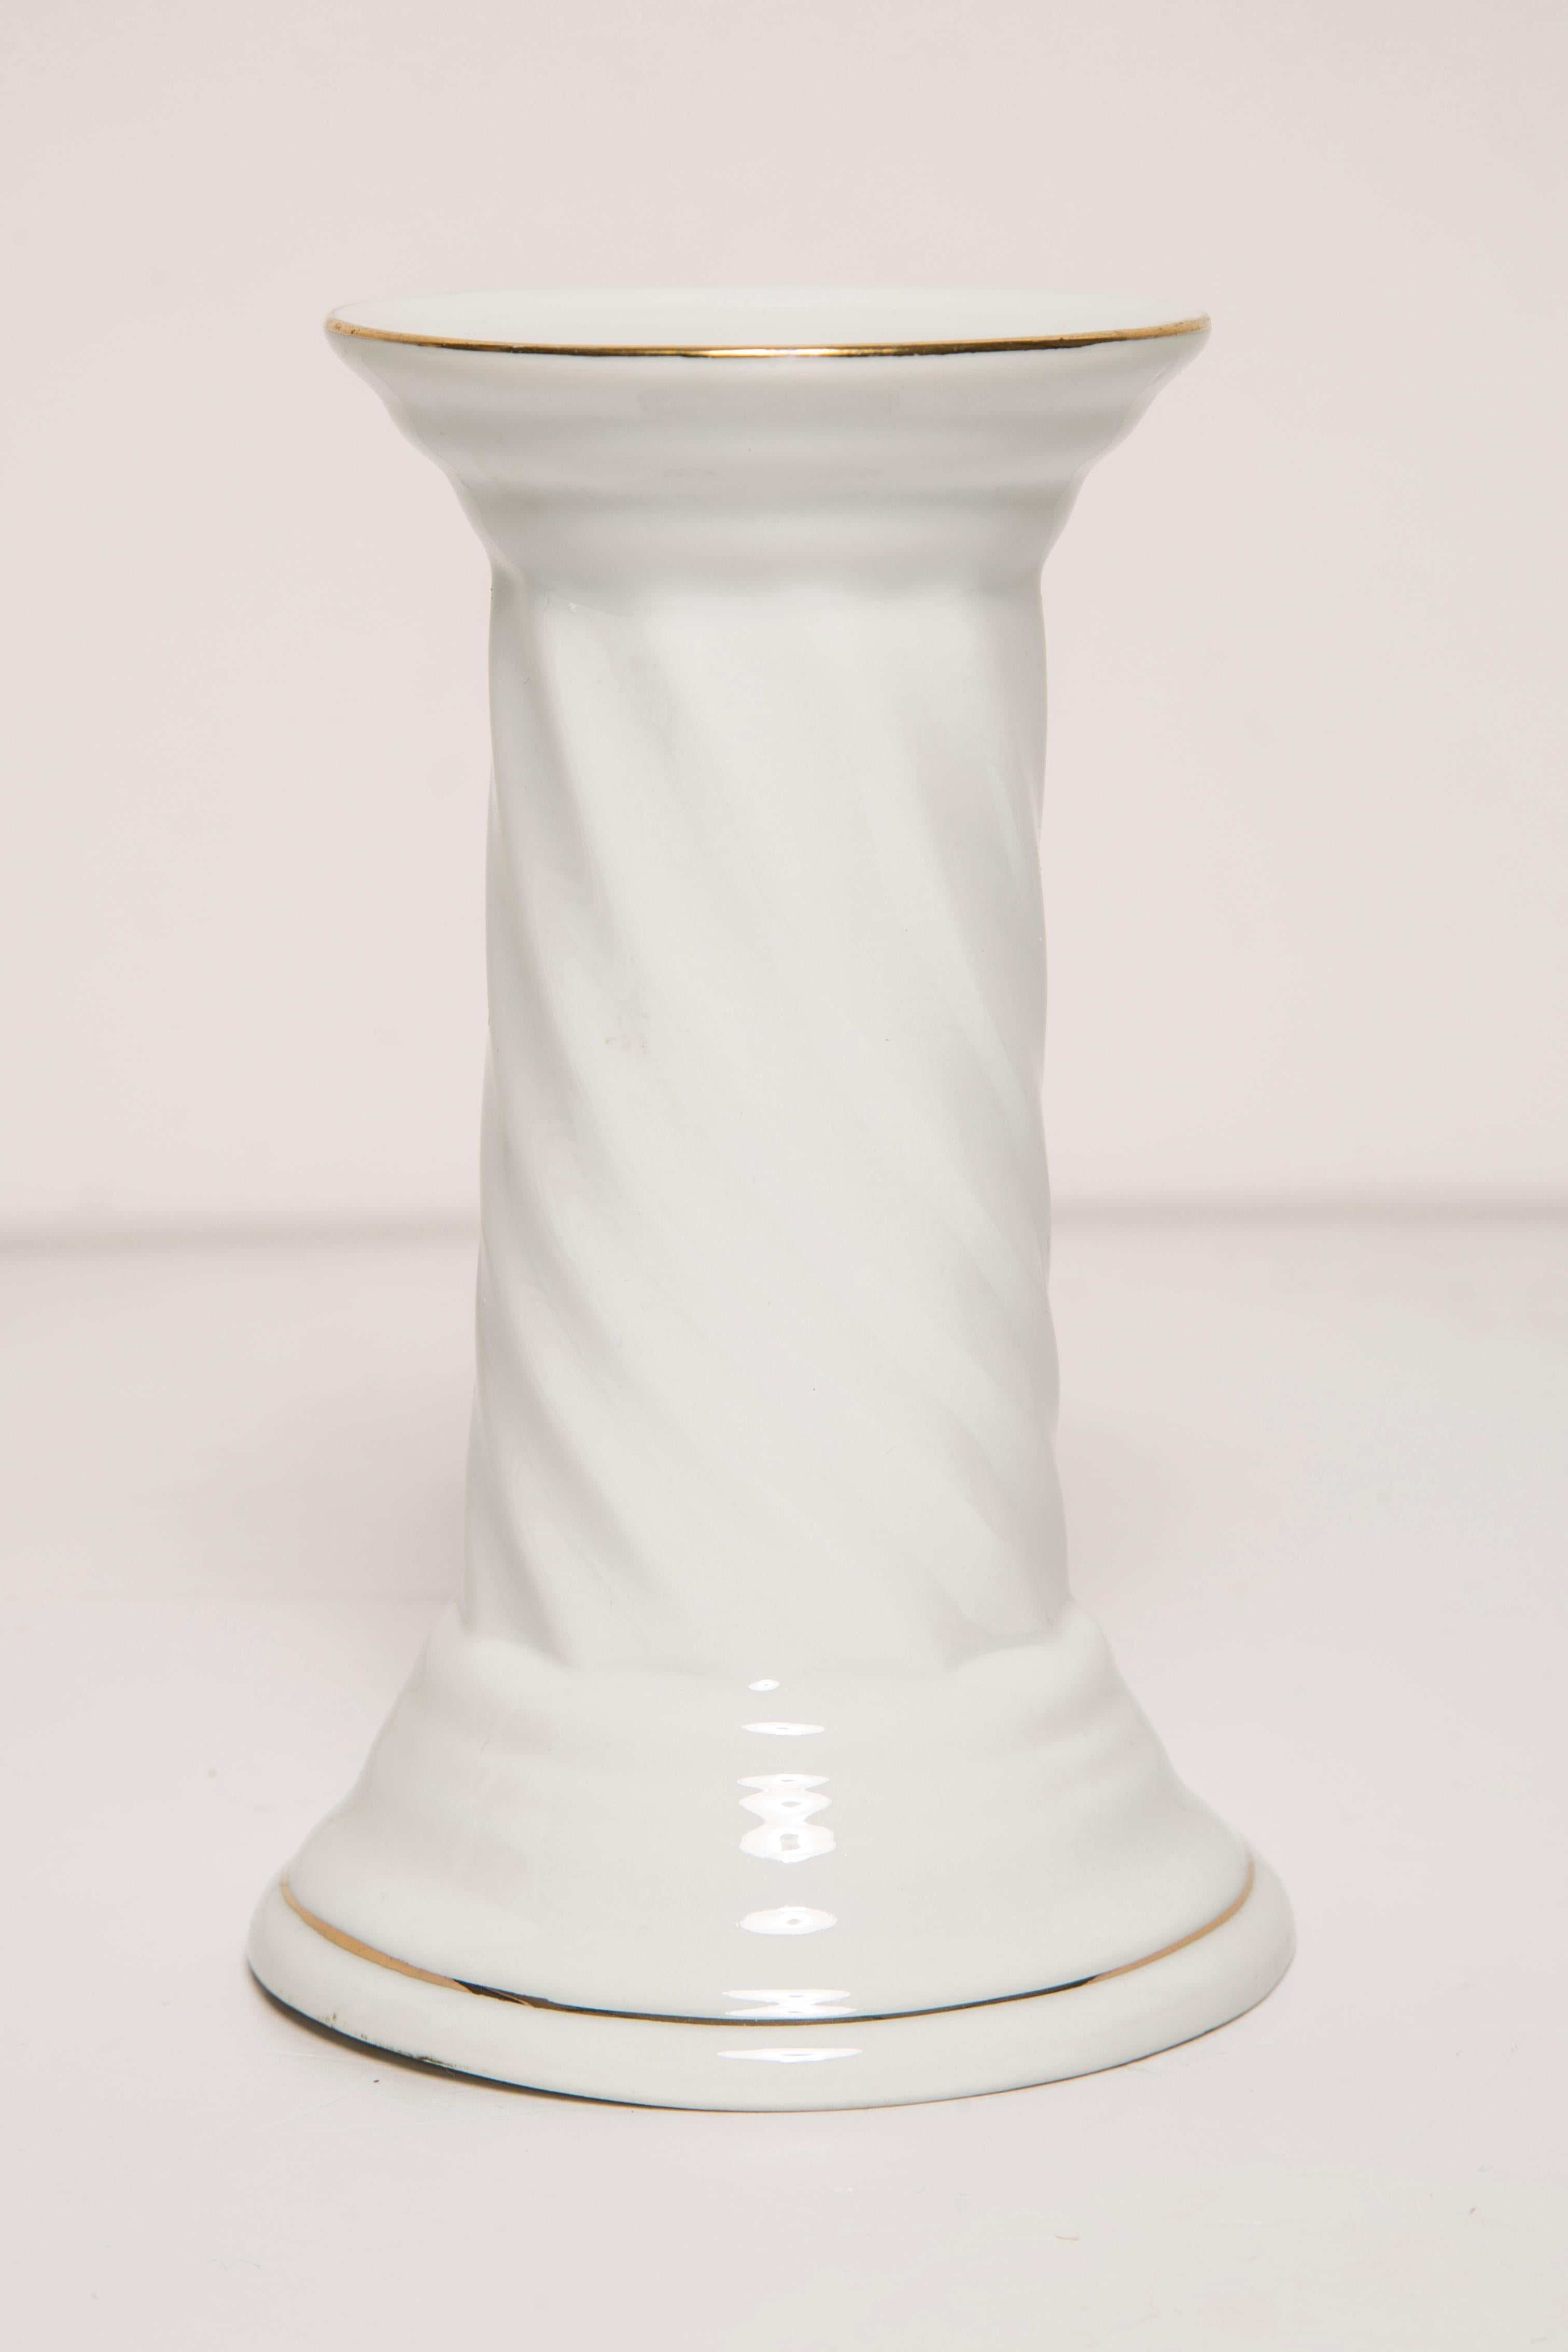 20th Century Ceramic White Candlestick, France, 1960s For Sale 2